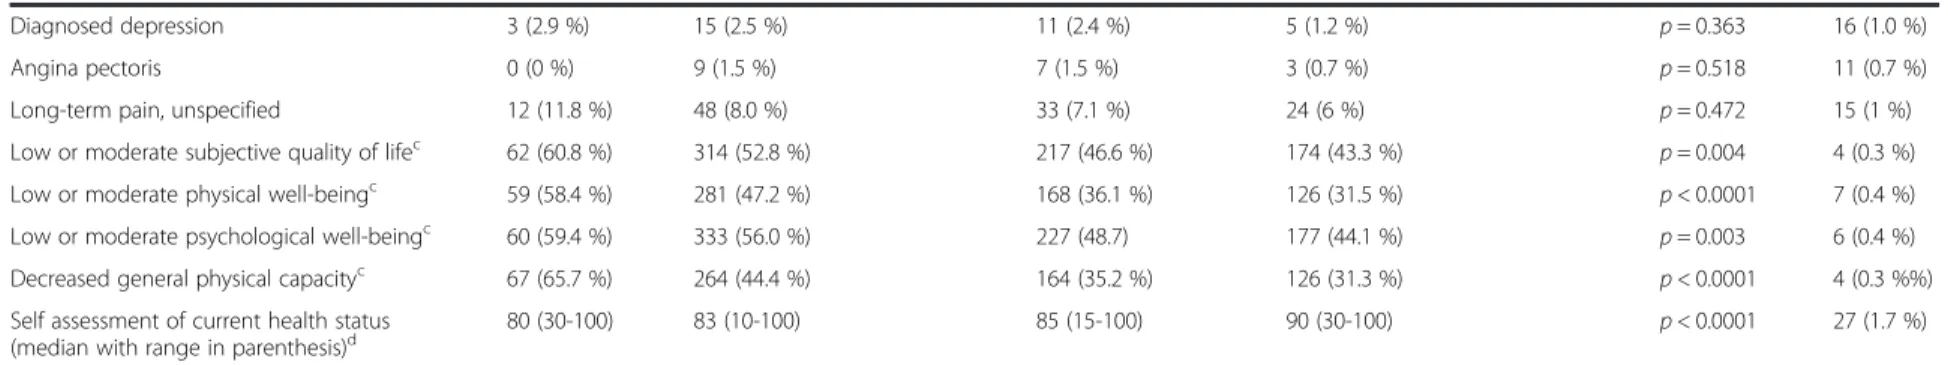 Table 1 Demography. Men operated with open or robot-assisted laparoscopic prostatectomy between 2008-2011 age ≤ 65 years old at 14 centers in Sweden